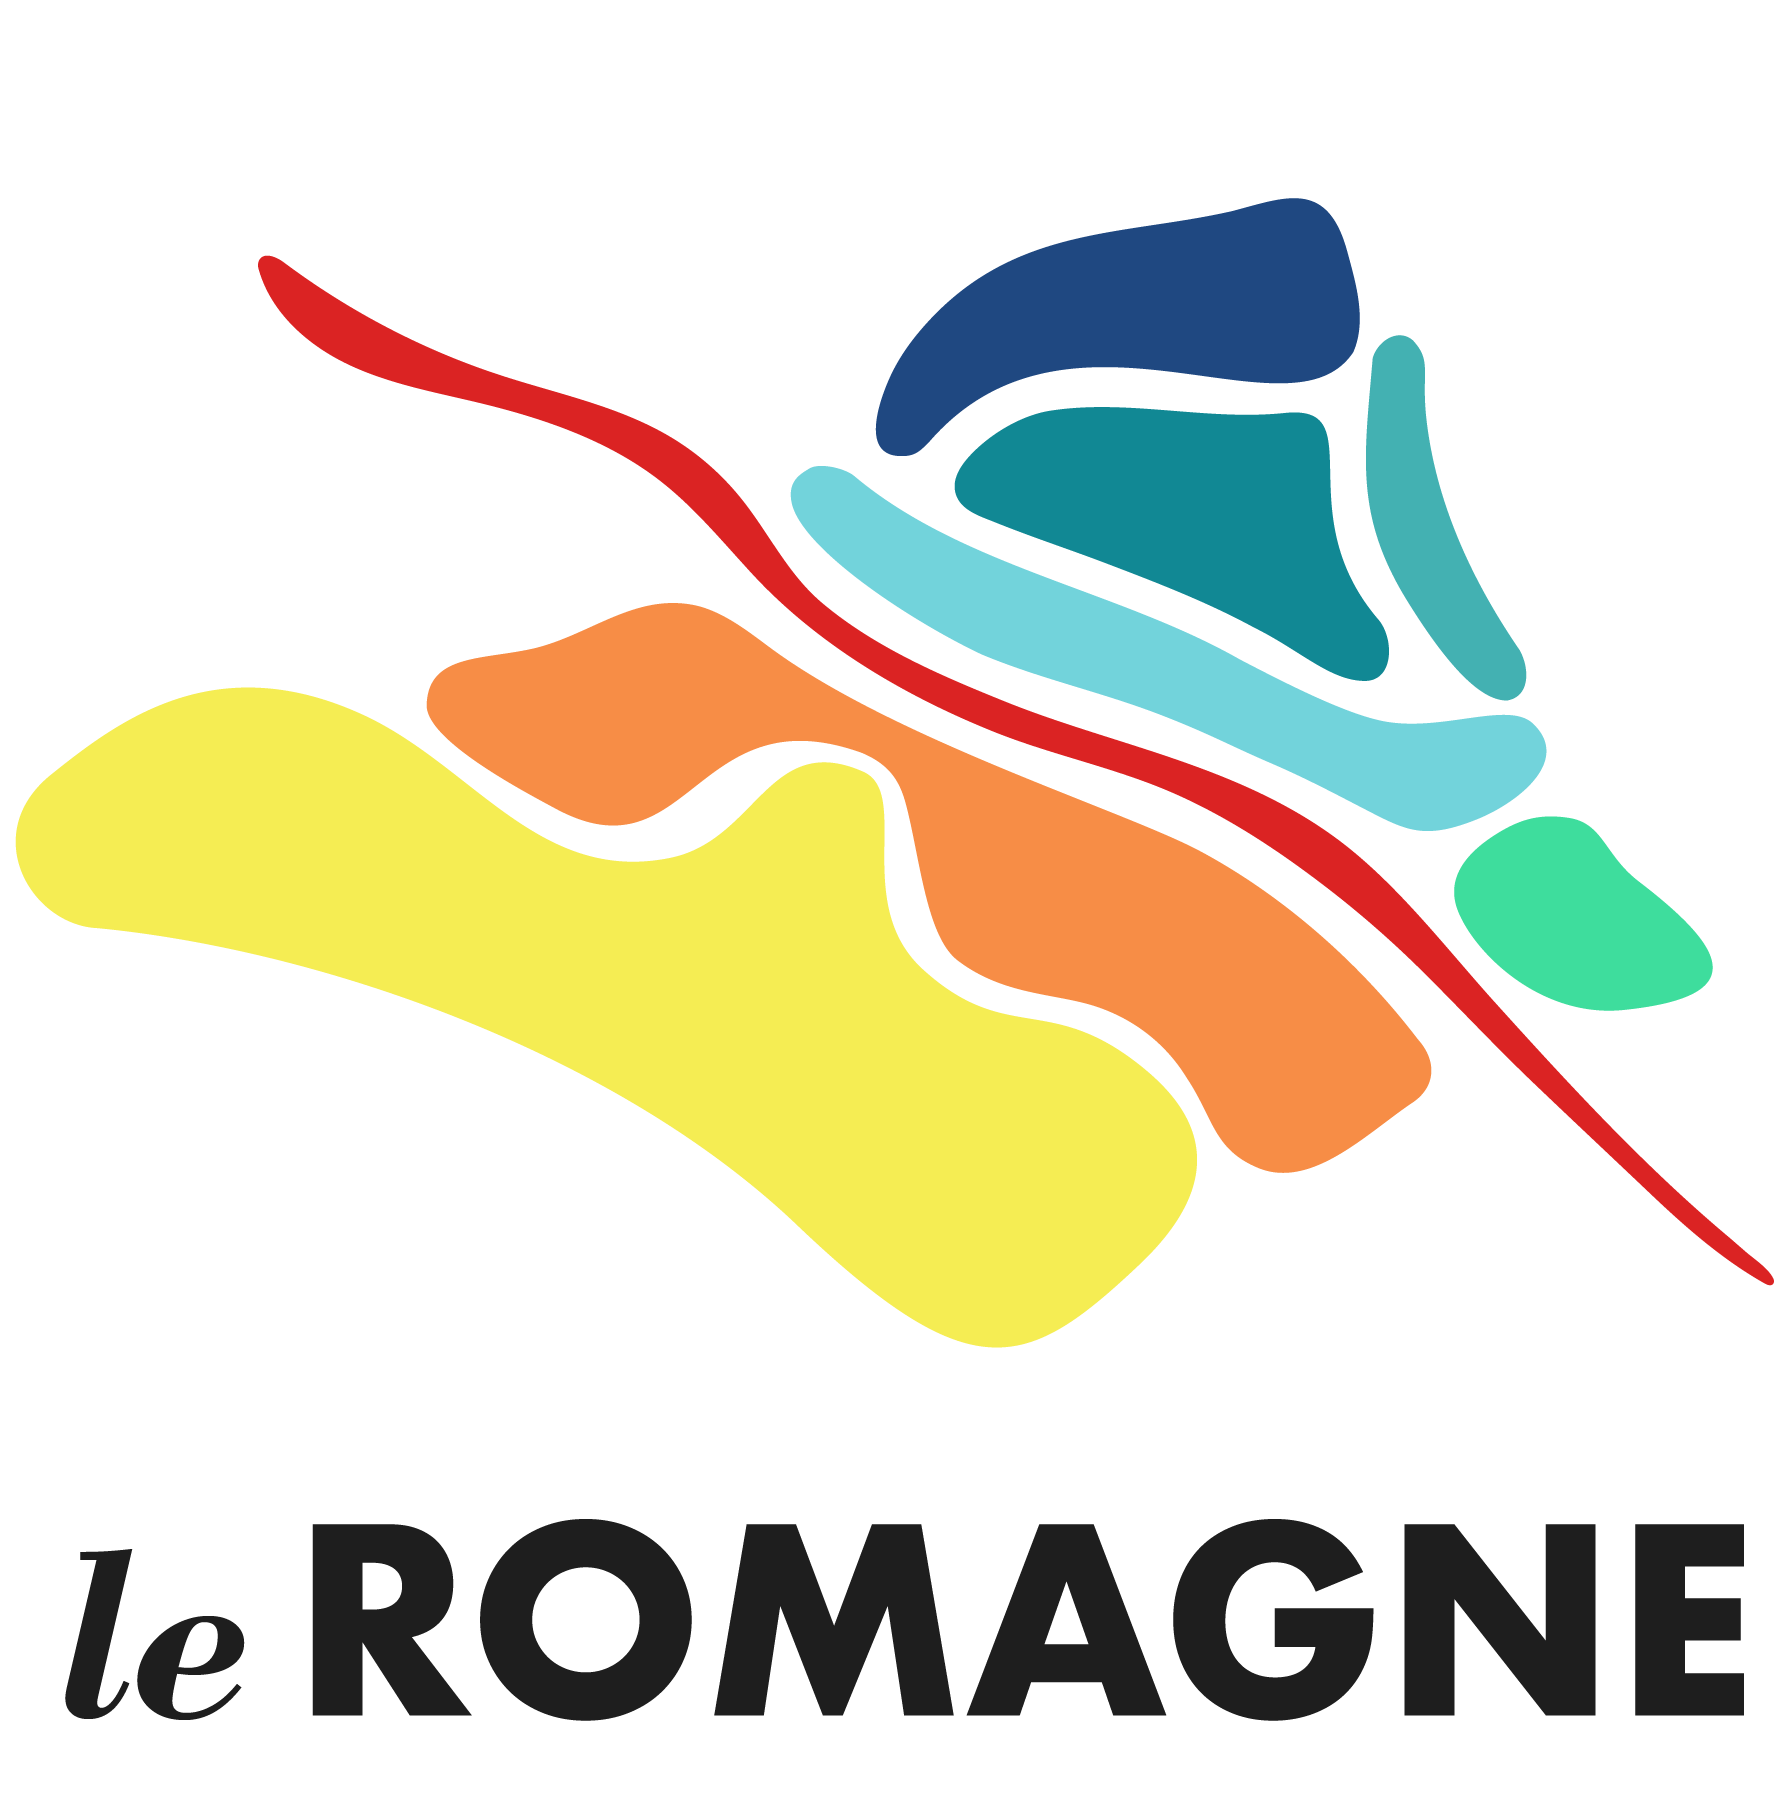 Le Romagne: Lands to be discovered